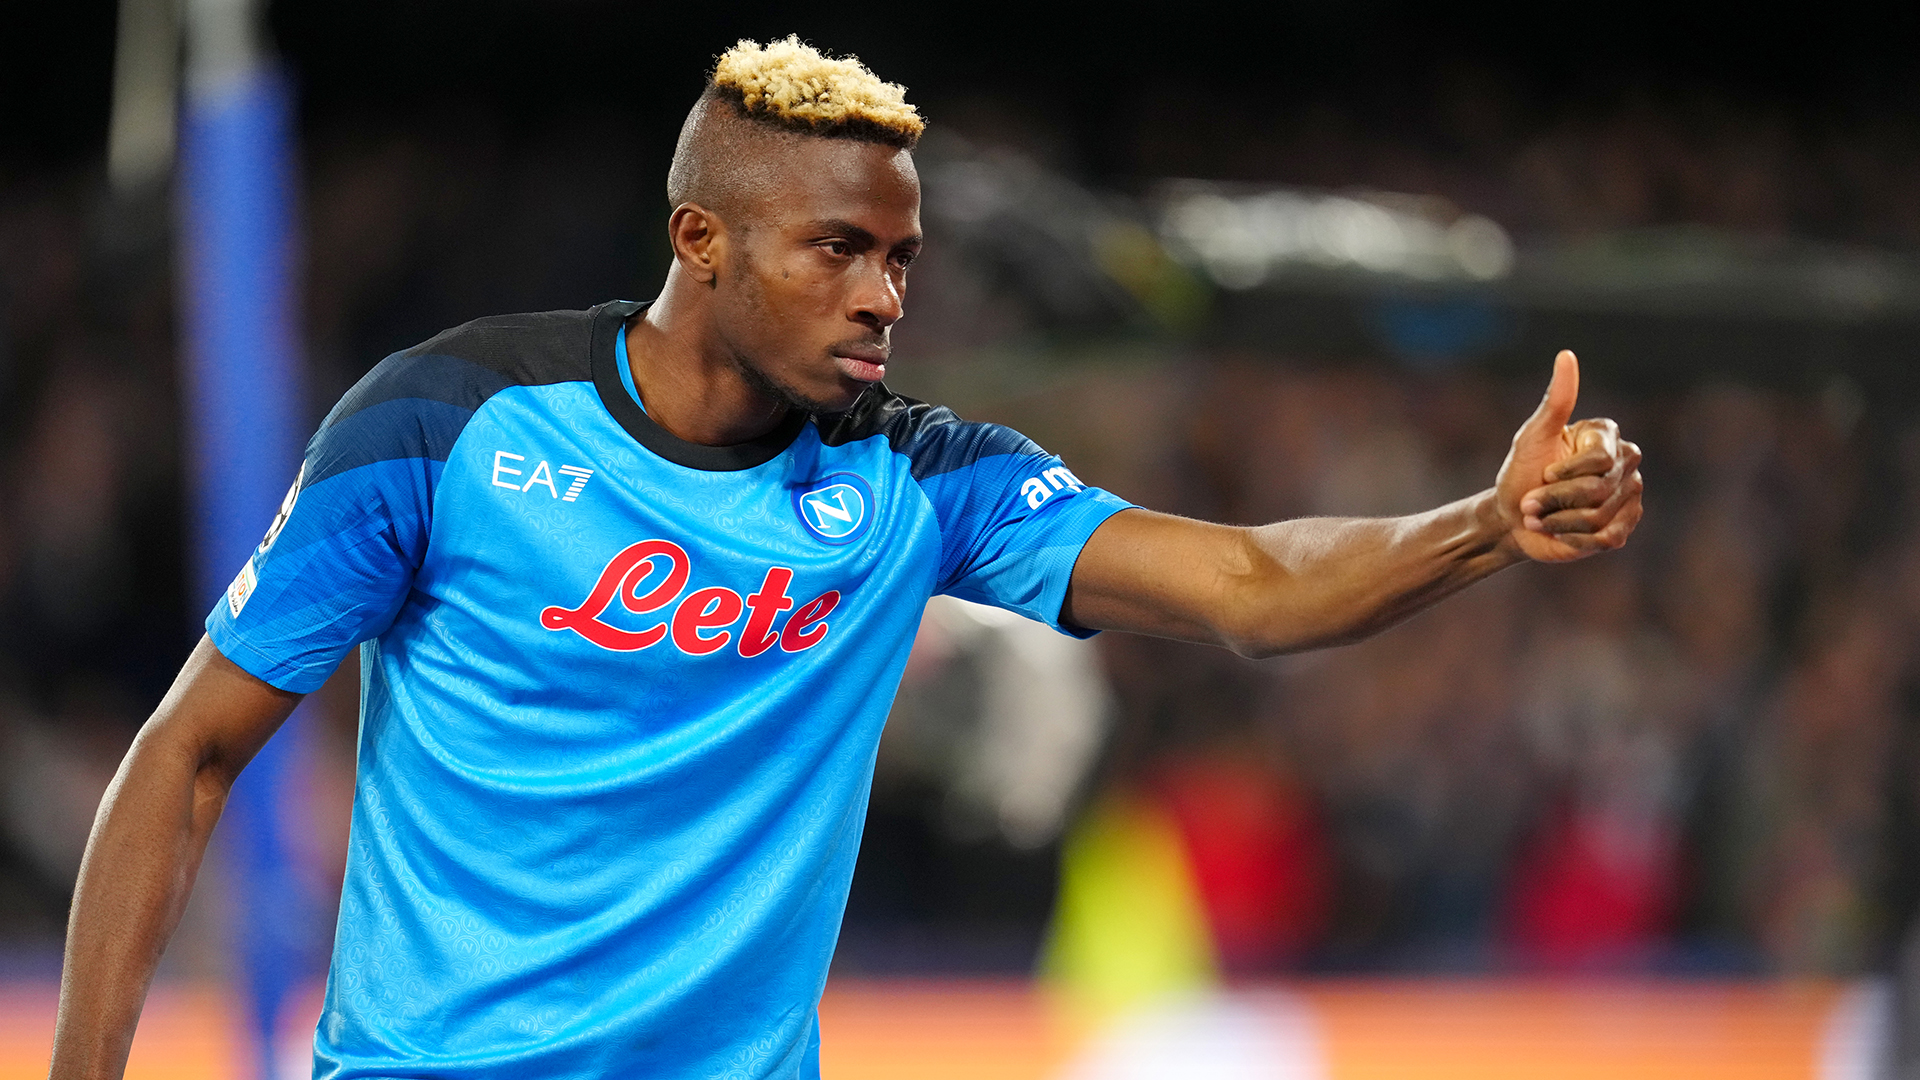 Victor Osimhen of SSC Napoli celebrates after scoring his opening goal ,during the UEFA Champions League round of 16 leg two match between SSC Napoli and Eintracht Frankfurt at Stadio Diego Armando Maradona on March 15, 2023 in Naples, Italy.